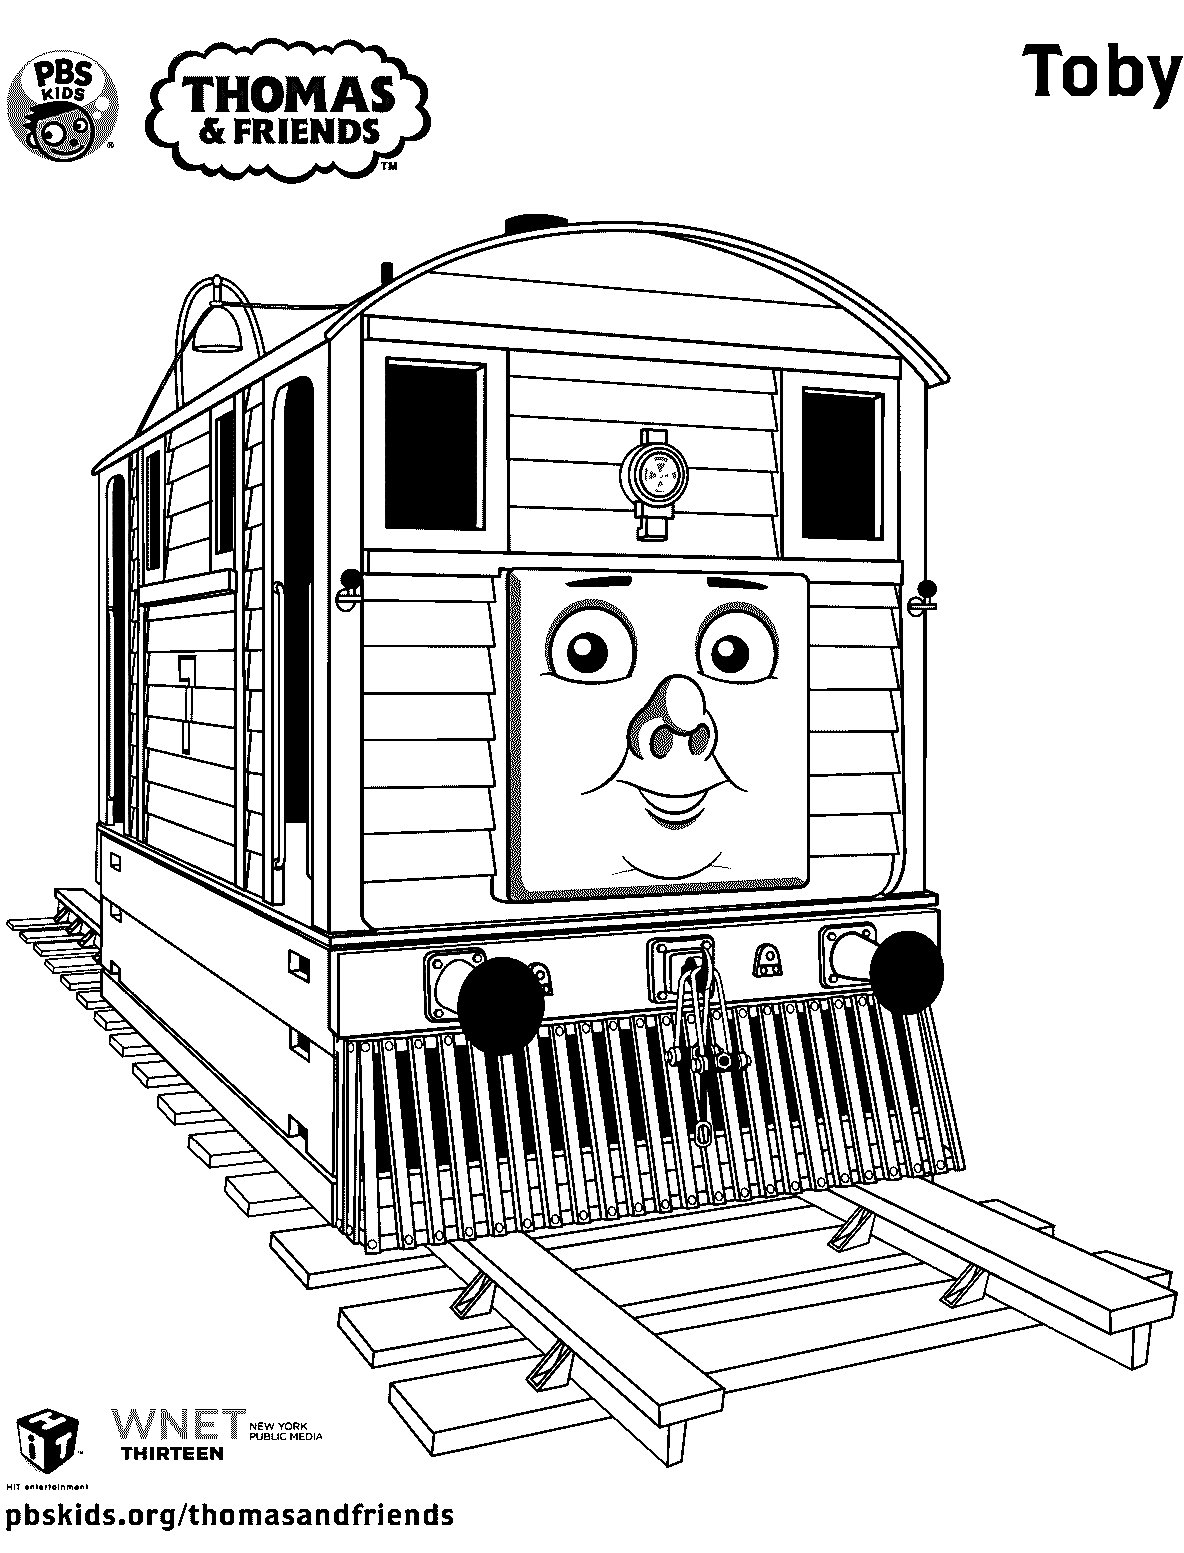 Toby di Thomas and Friends